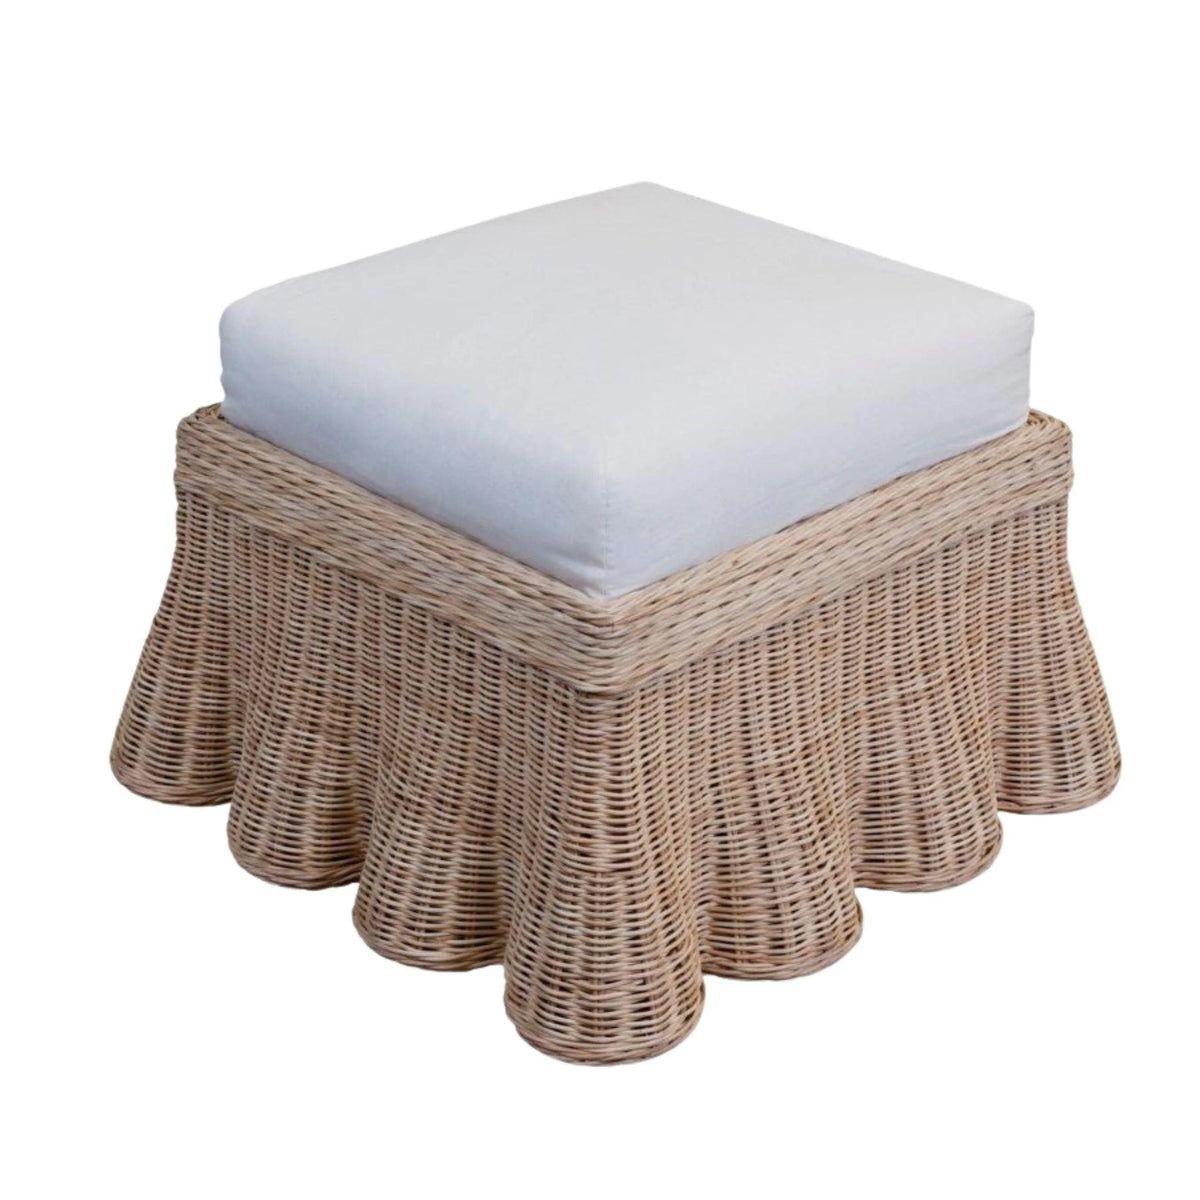 Scalloped Square Upholstered Ottoman | The Well Appointed House, LLC